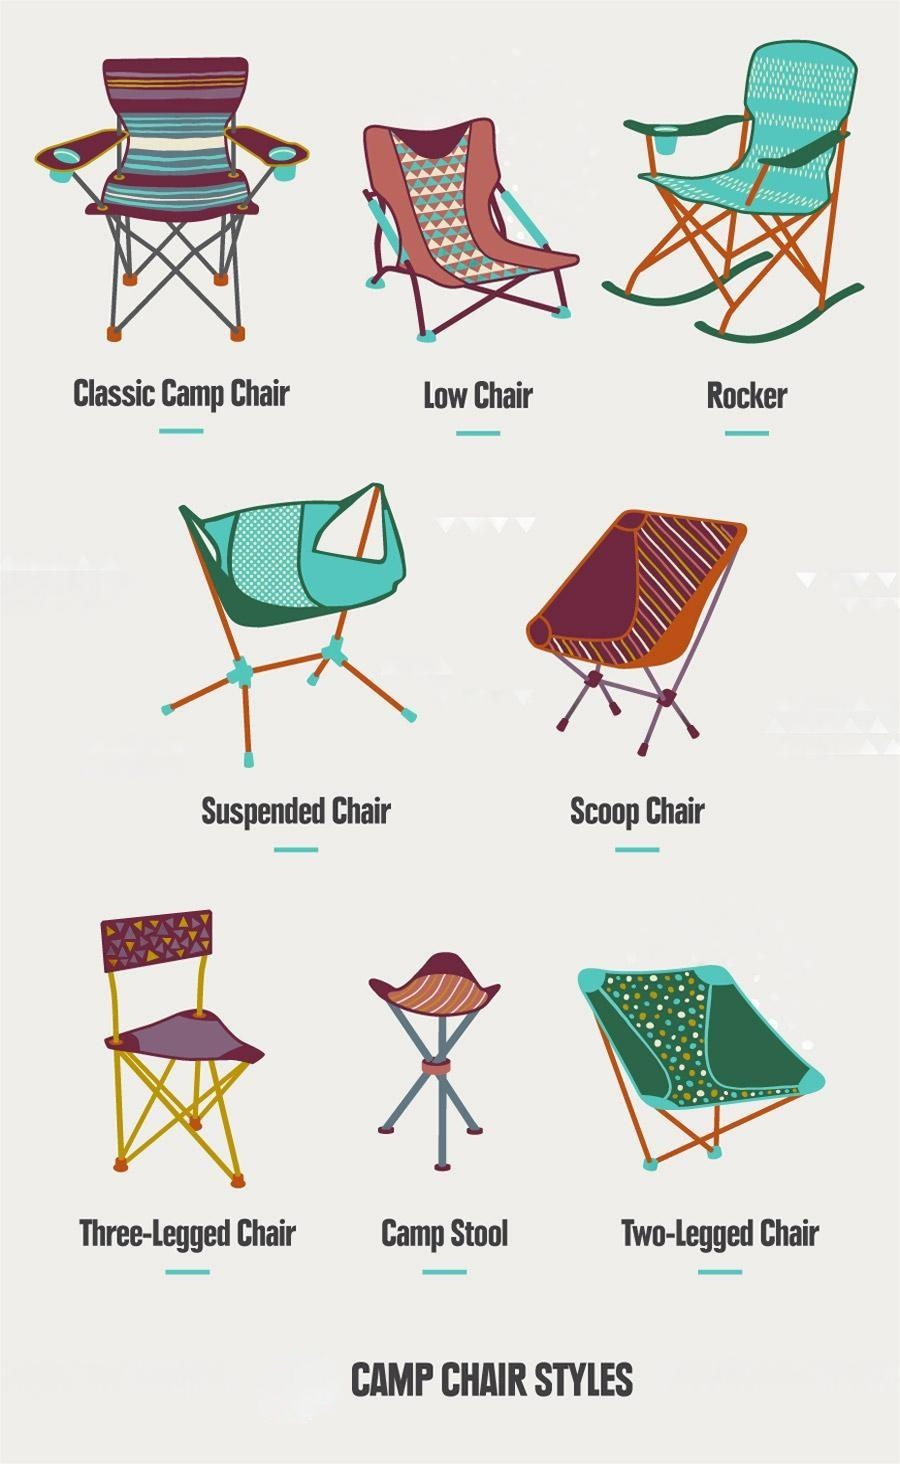 Considerations of choosing a camping chair?